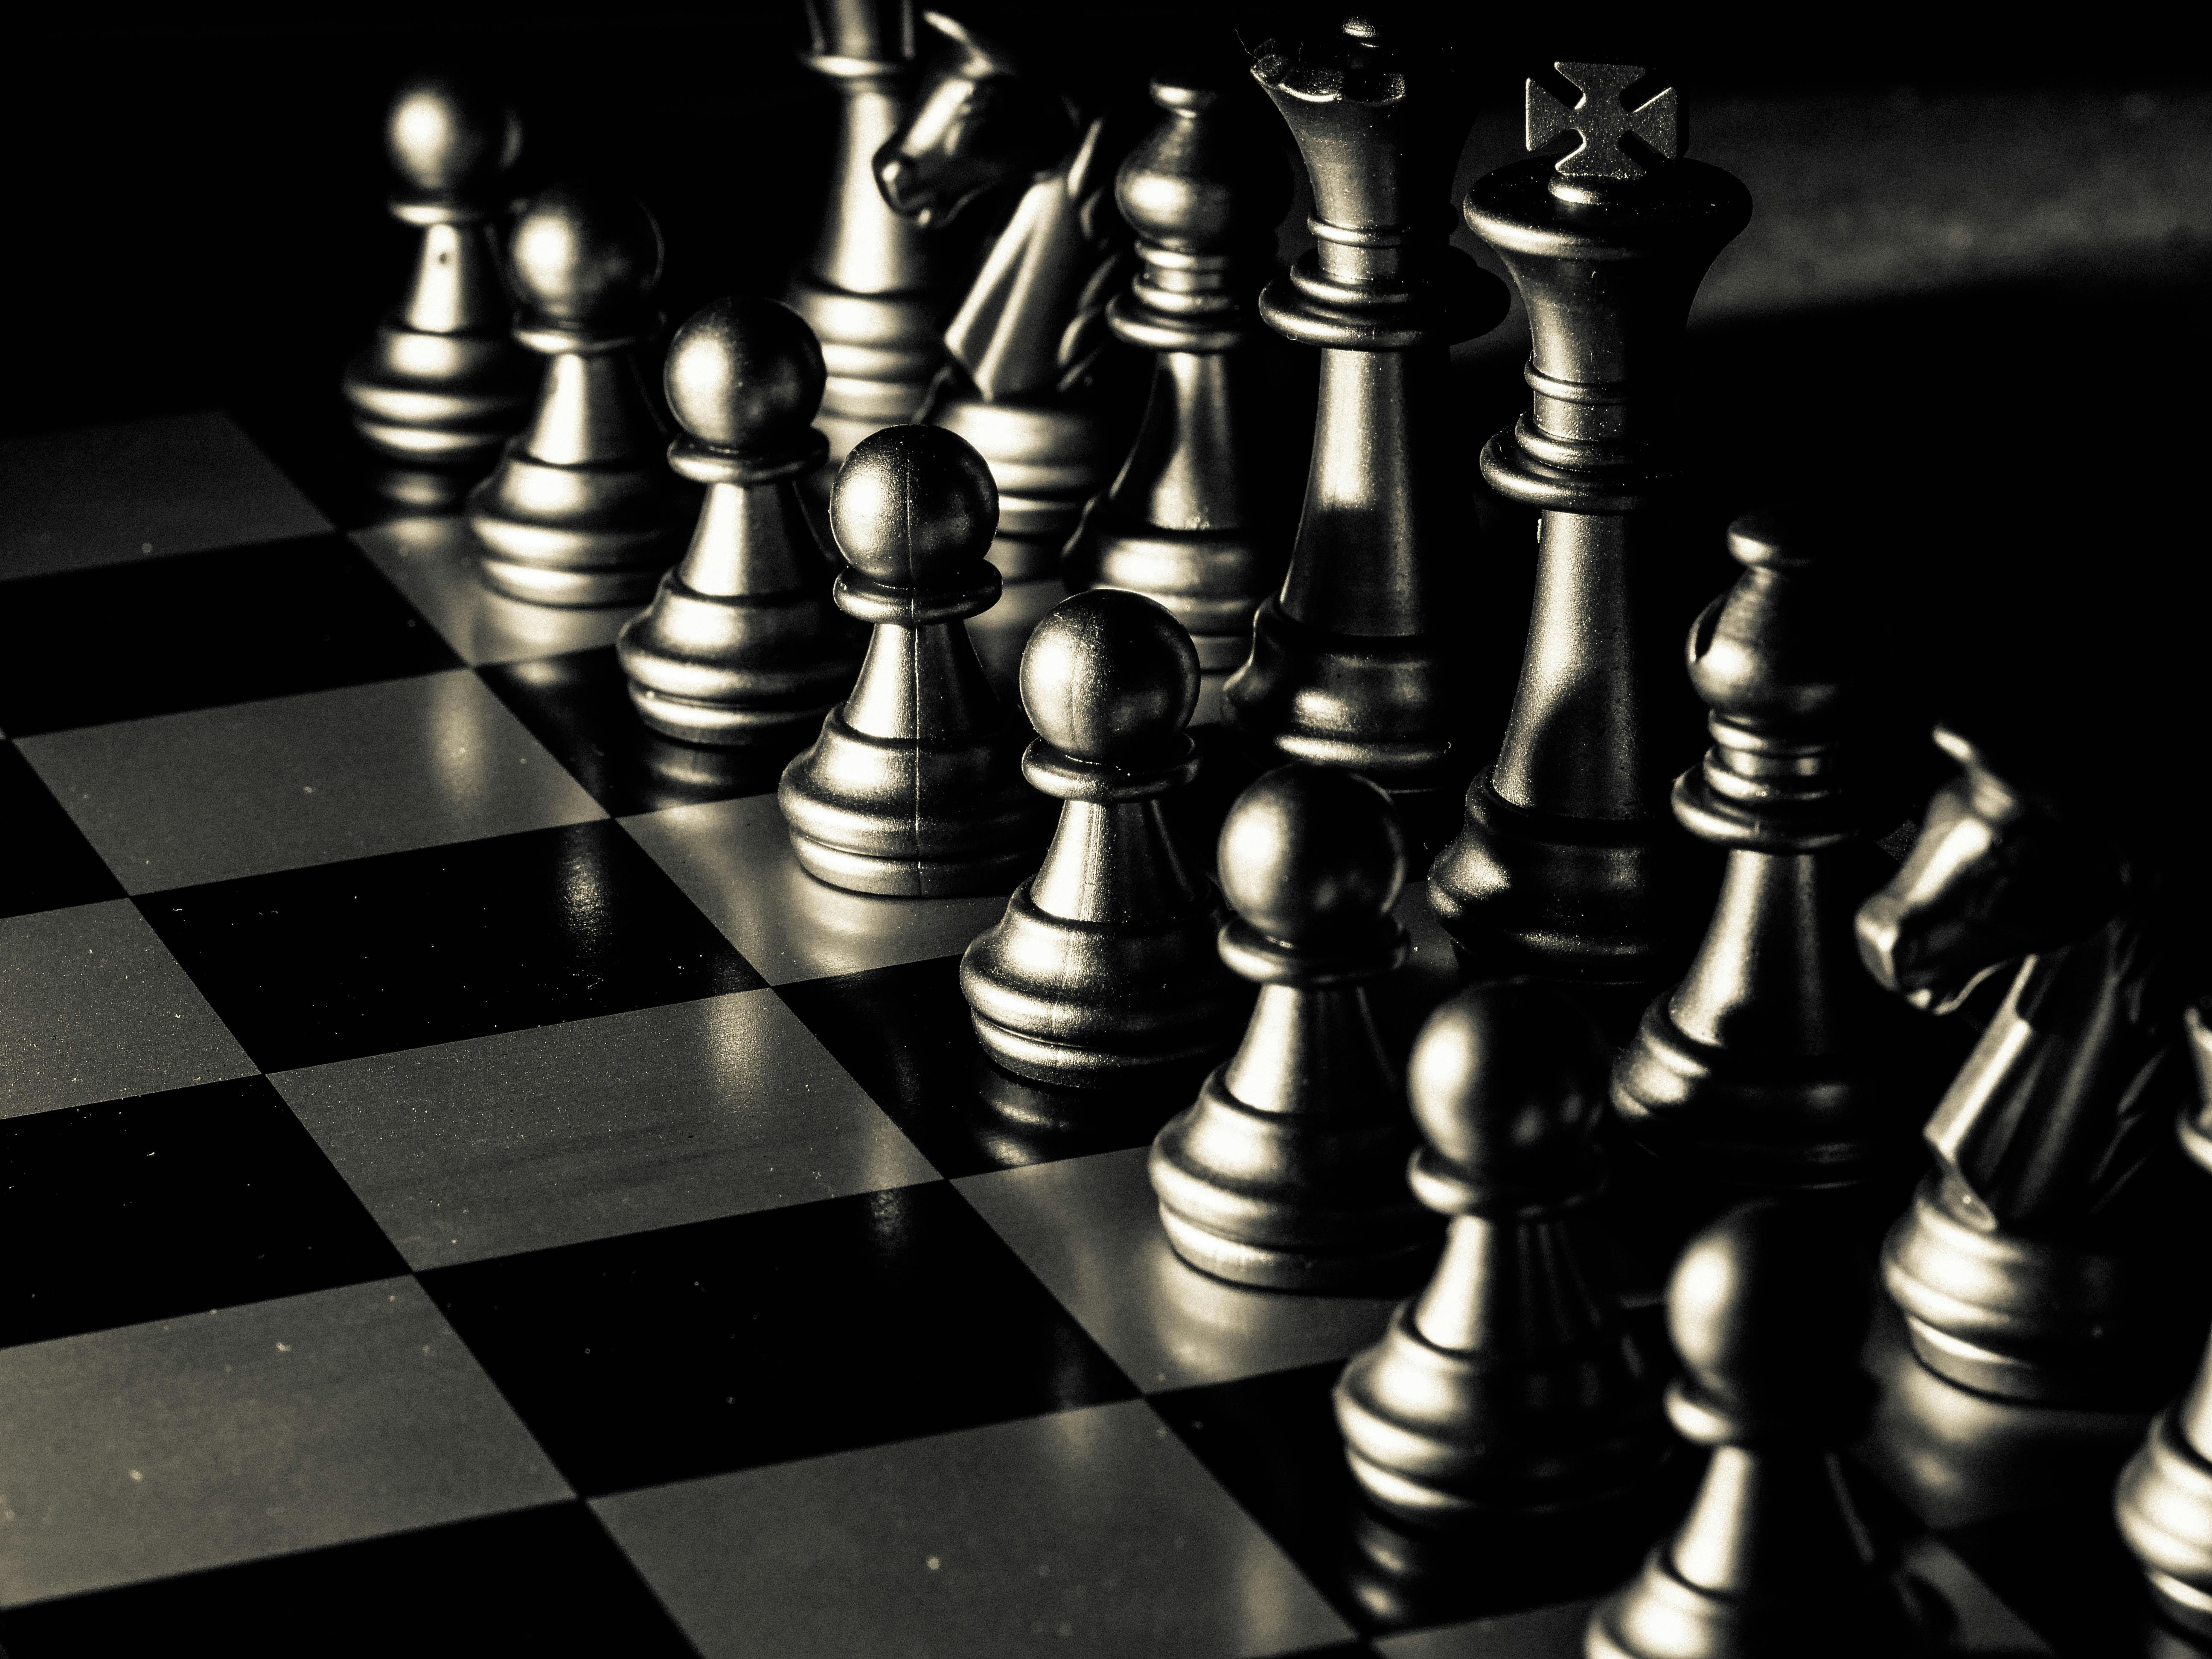 the chessboard  Minimal photography, Conceptual photography